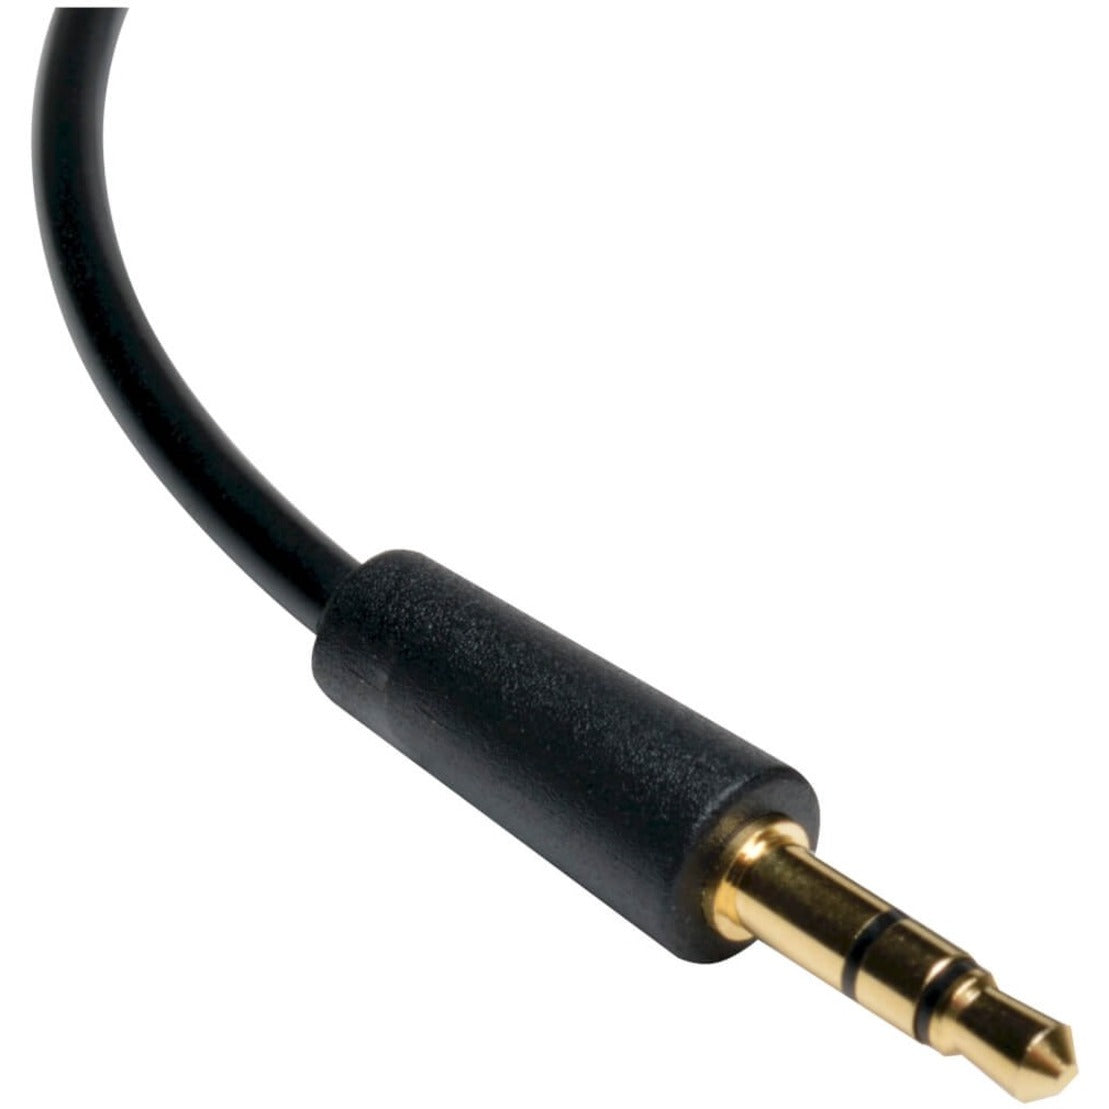 Tripp Lite P312-003-RA 3.5mm Mini Stereo Audio Cable with One Right Angle Plug (M/M) 3-ft, Gold-Plated Connectors